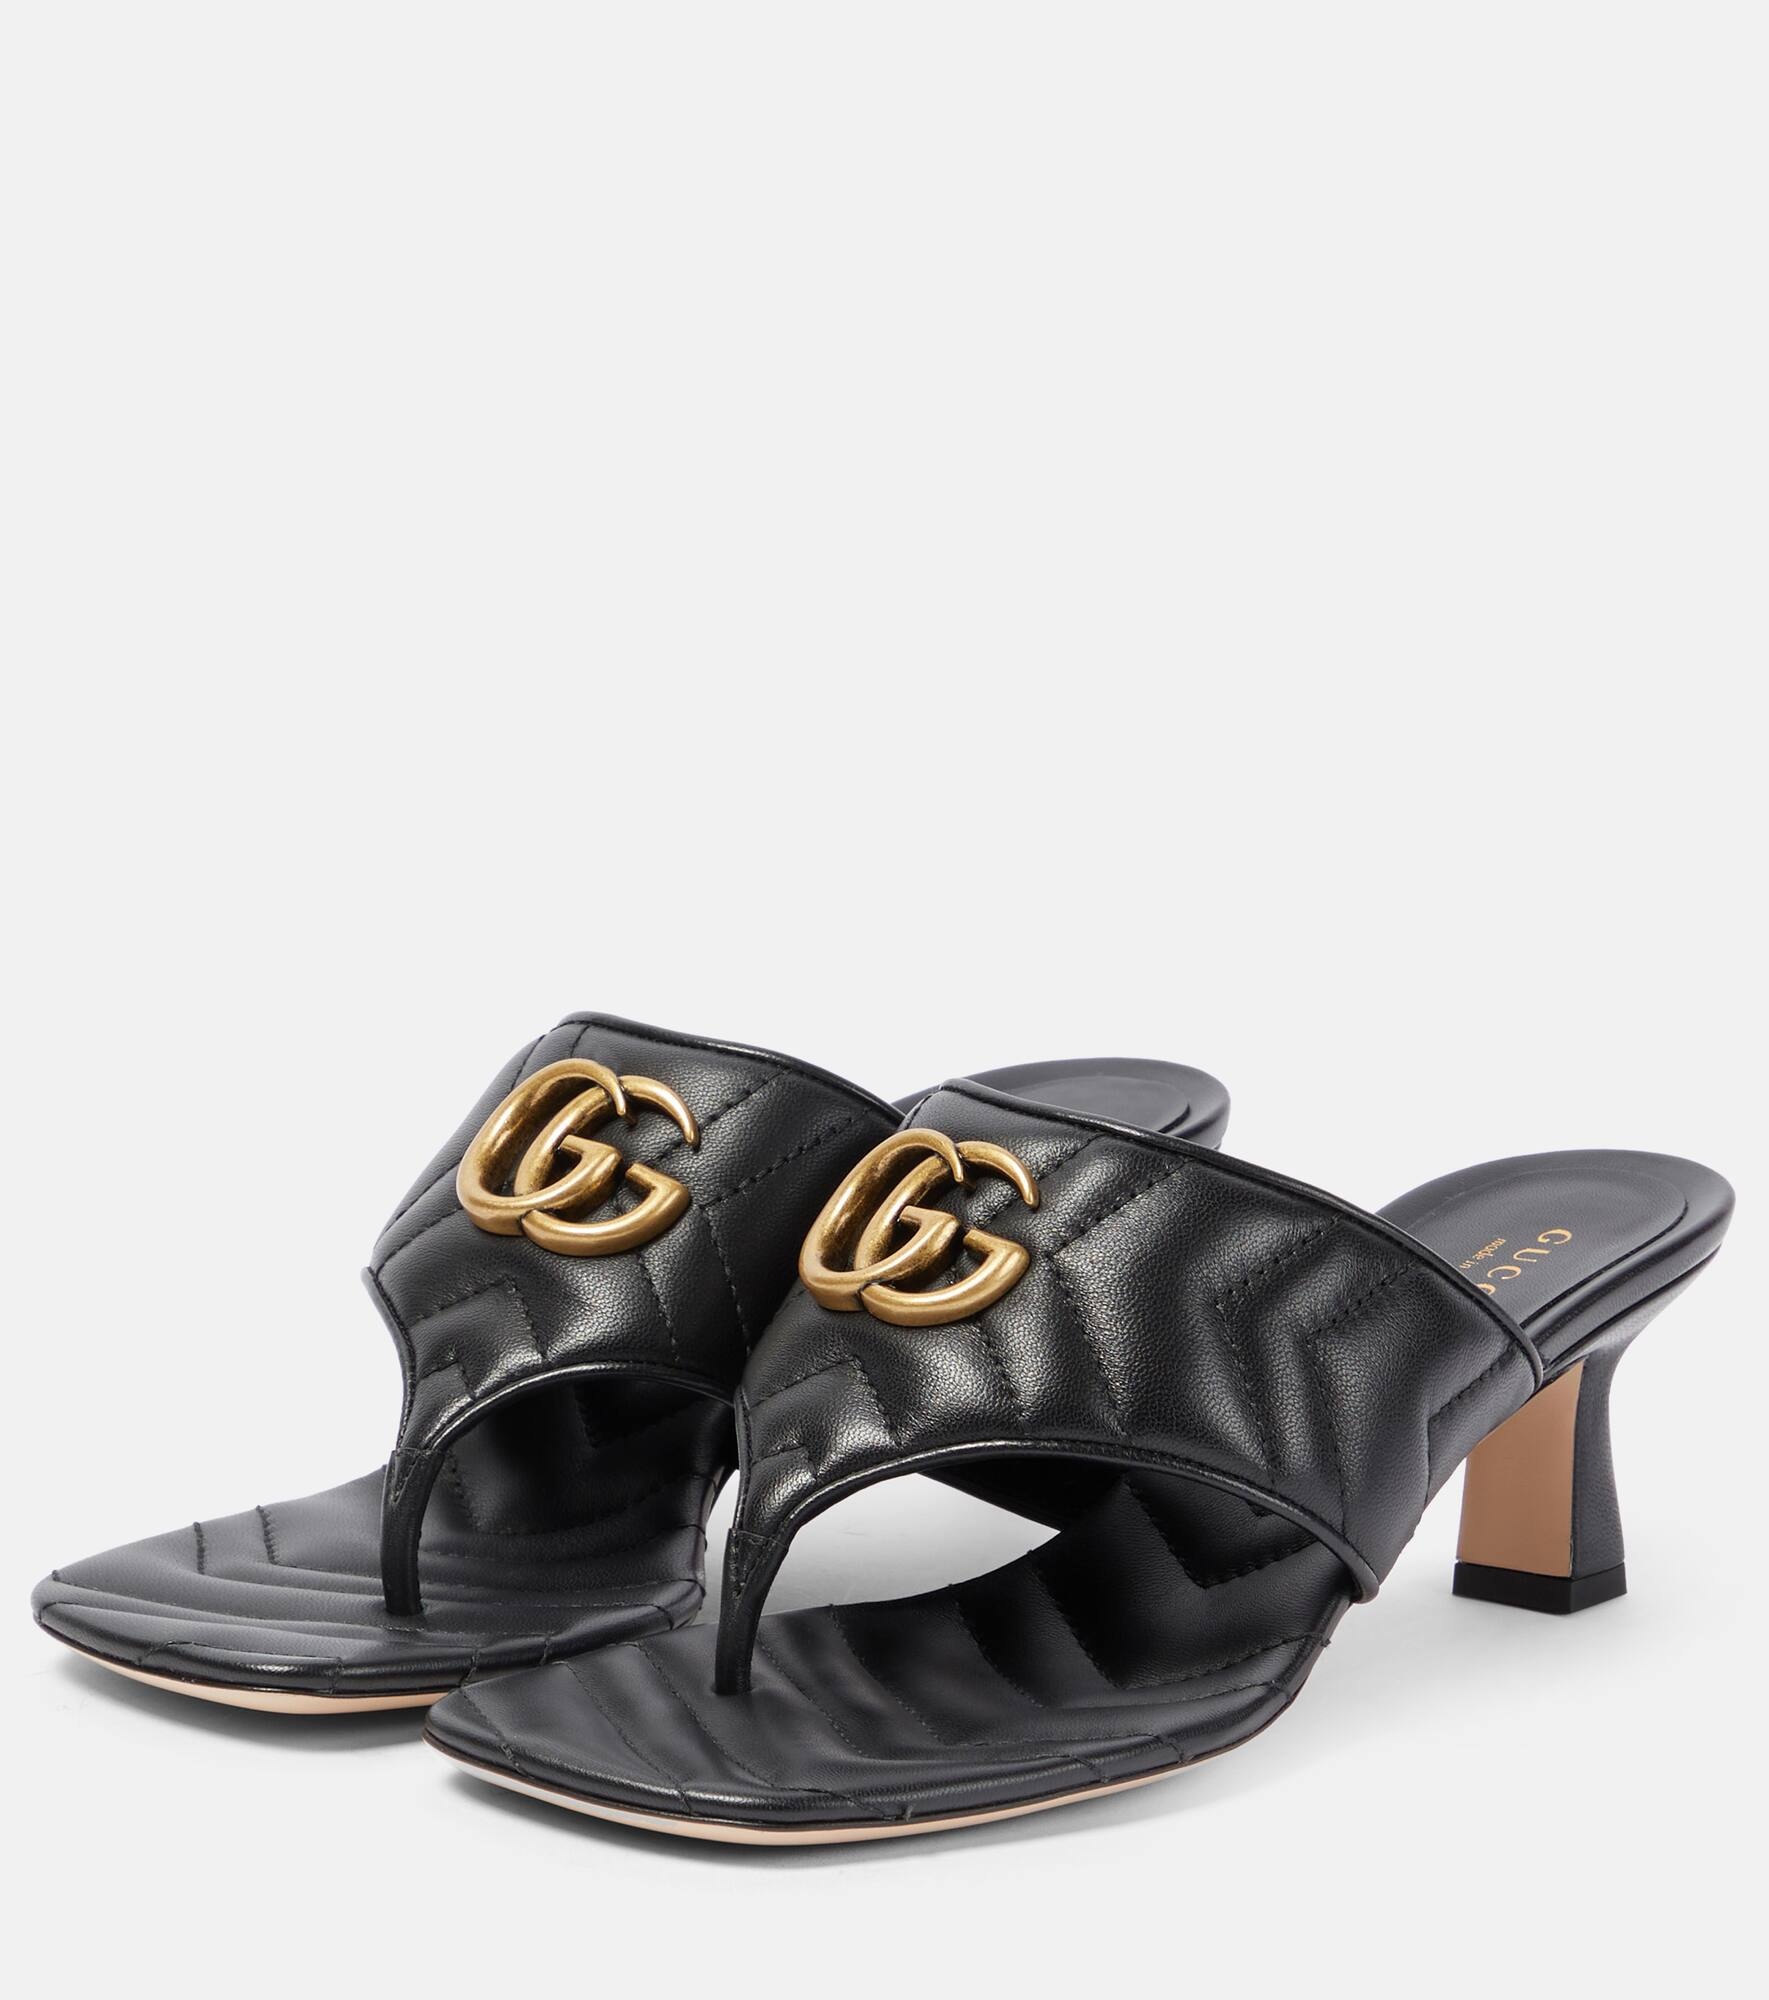 GG Marmont 55 leather thong sandals - 3